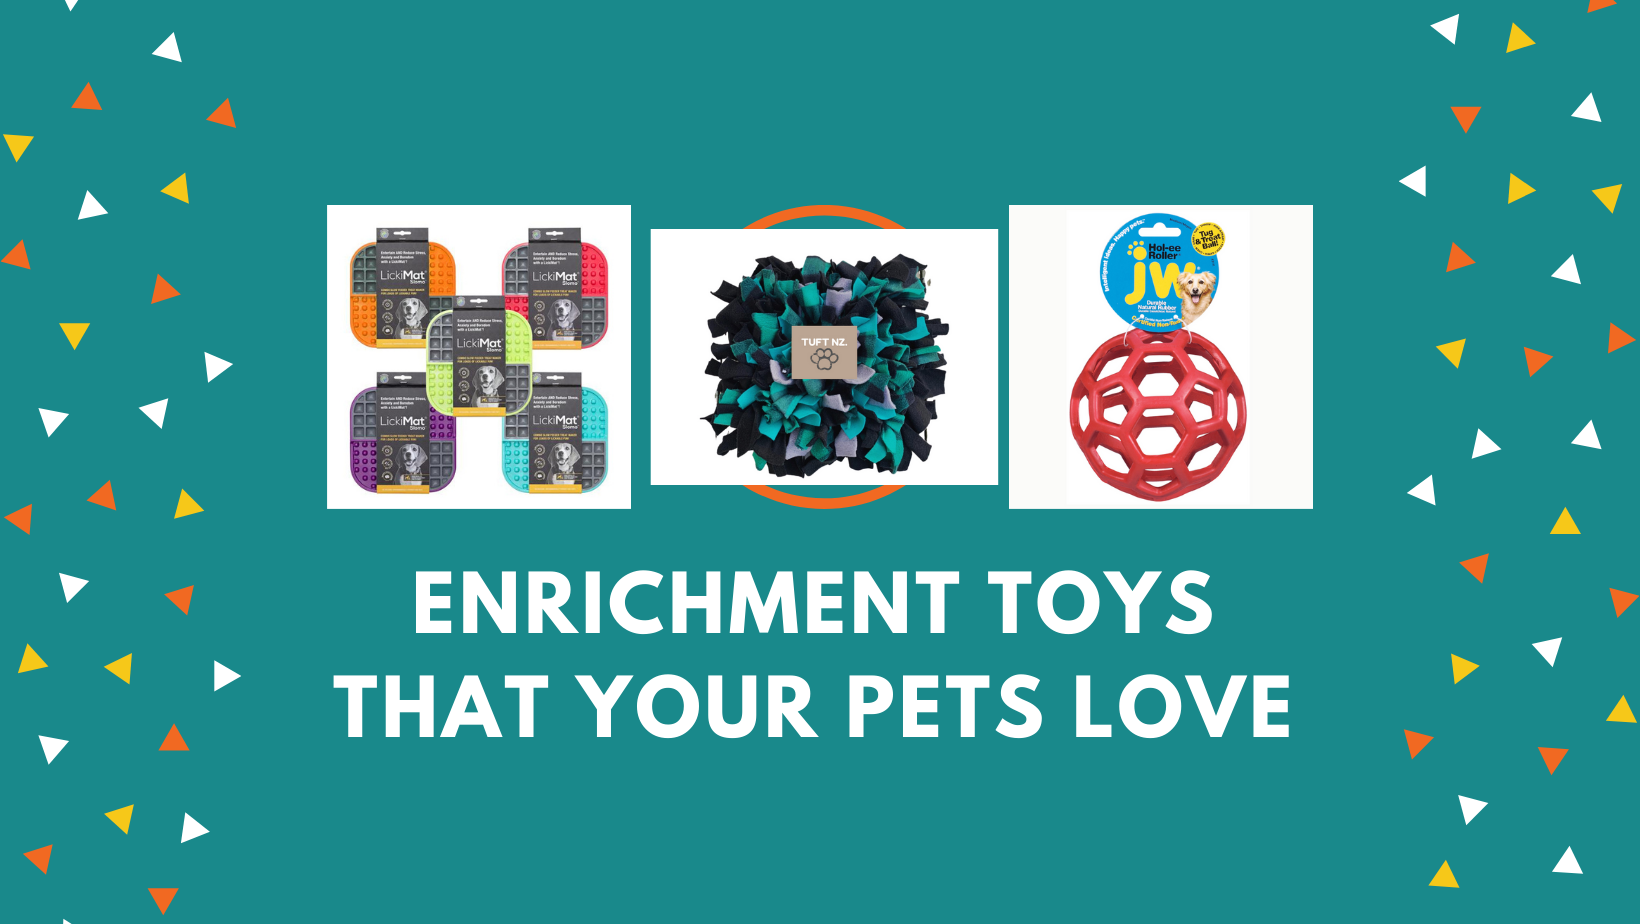 What Are Enrichment Toys?